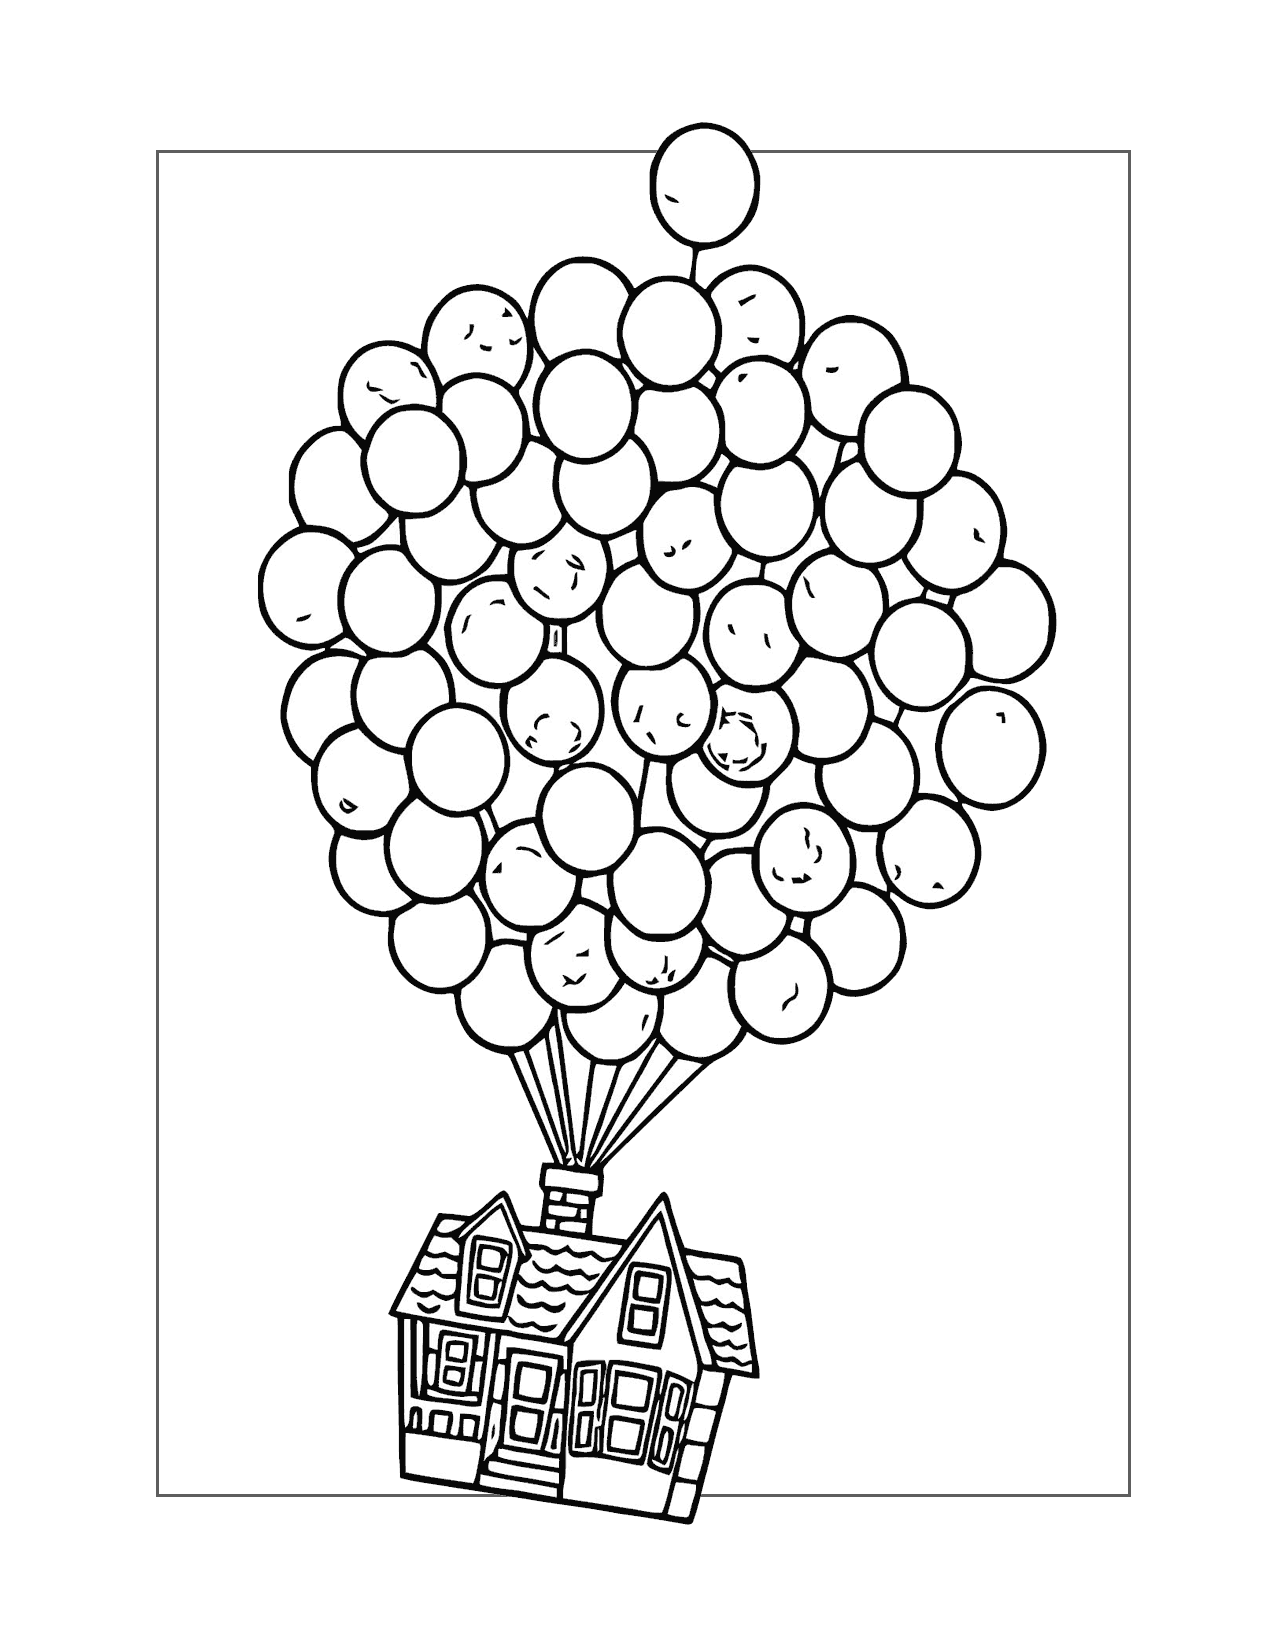 Disneys Up Coloring Page